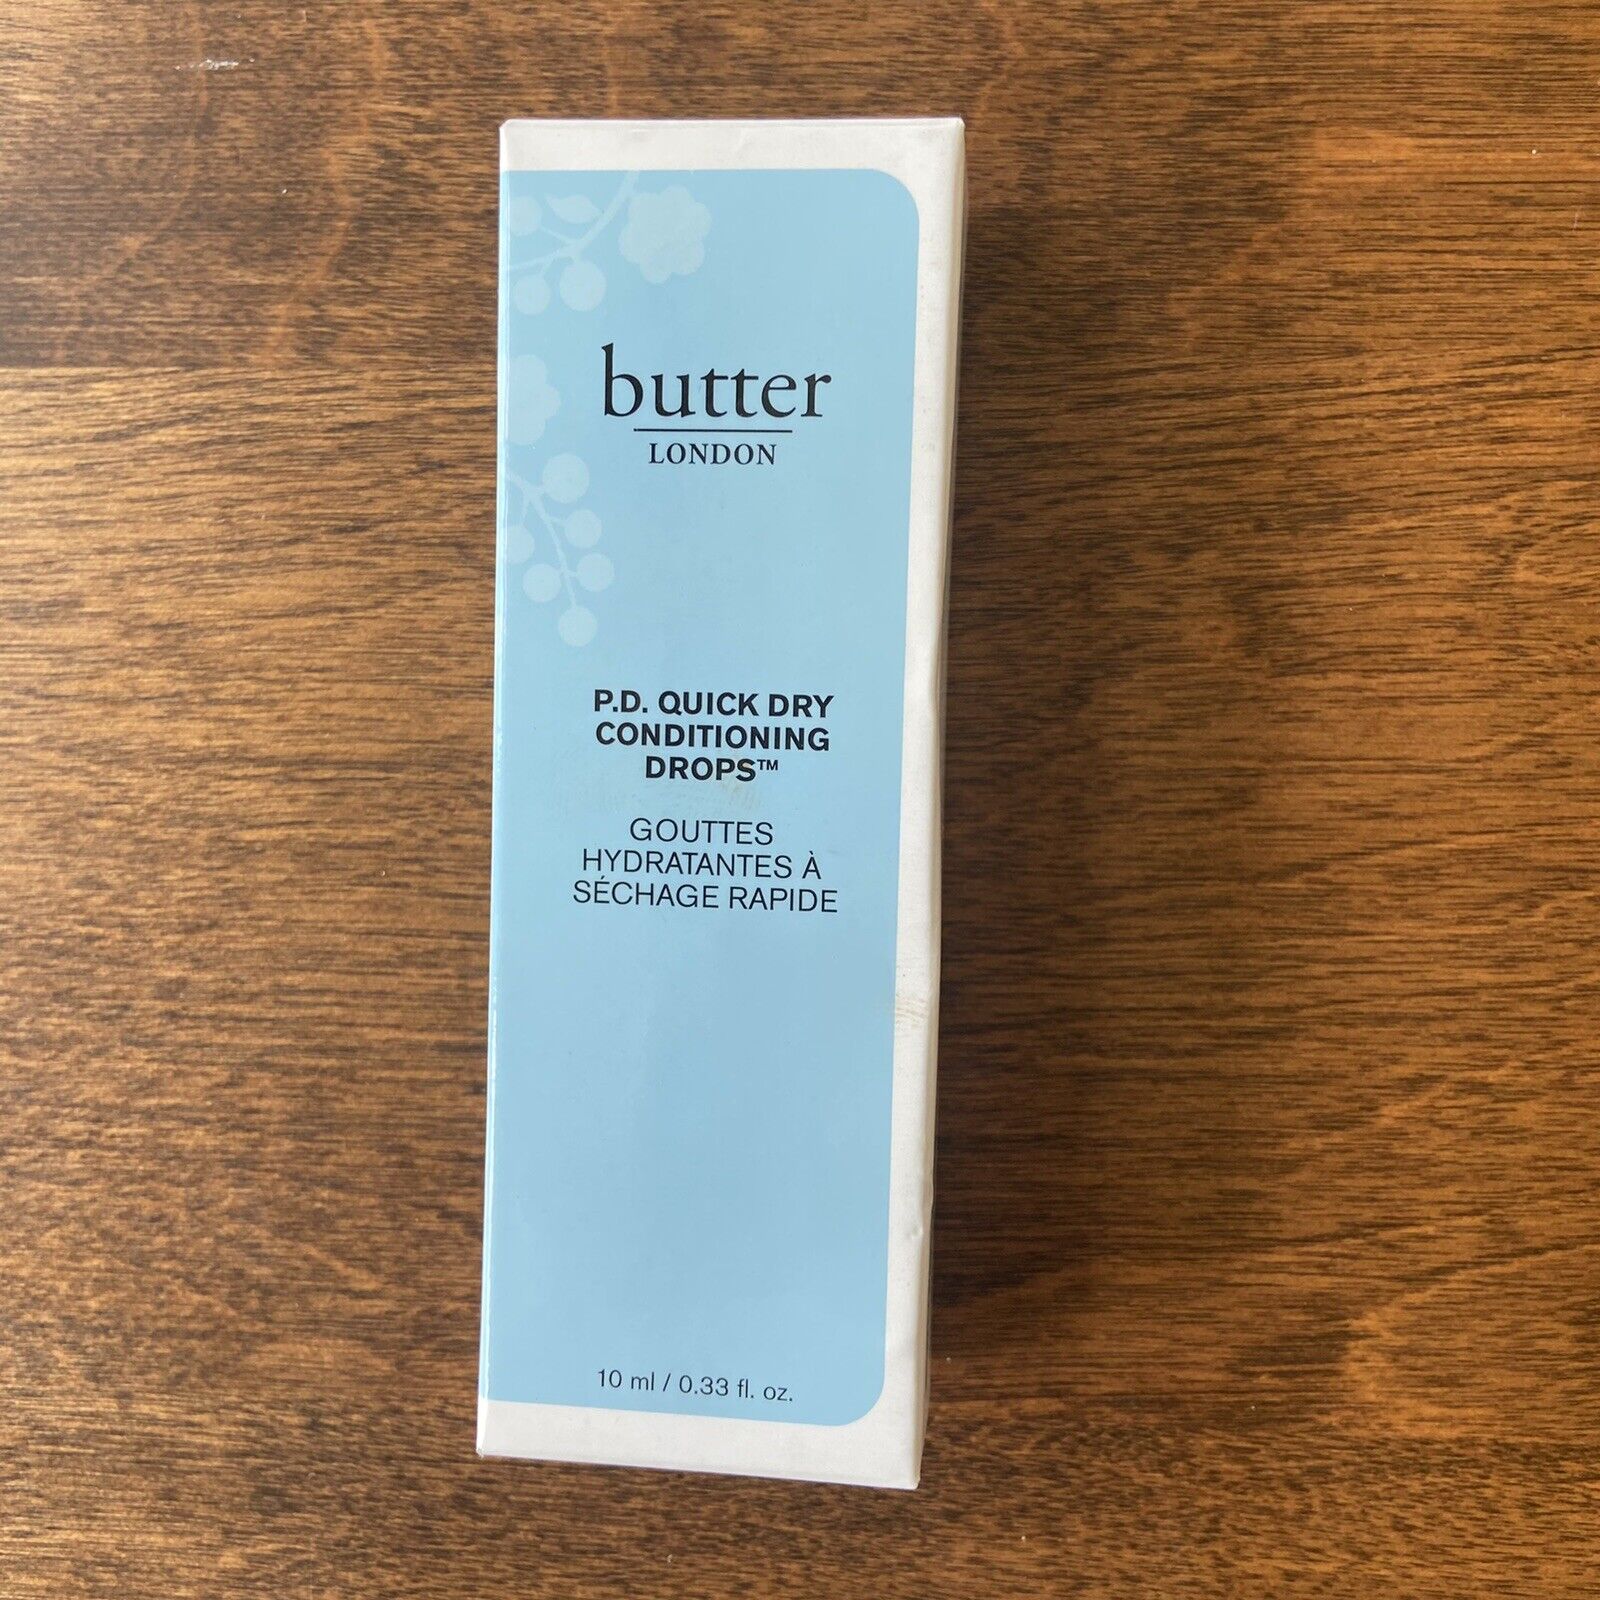 Butter London P.D. Quick Dry Conditioning Drops 0.33 fl. ox. NIB Sealed